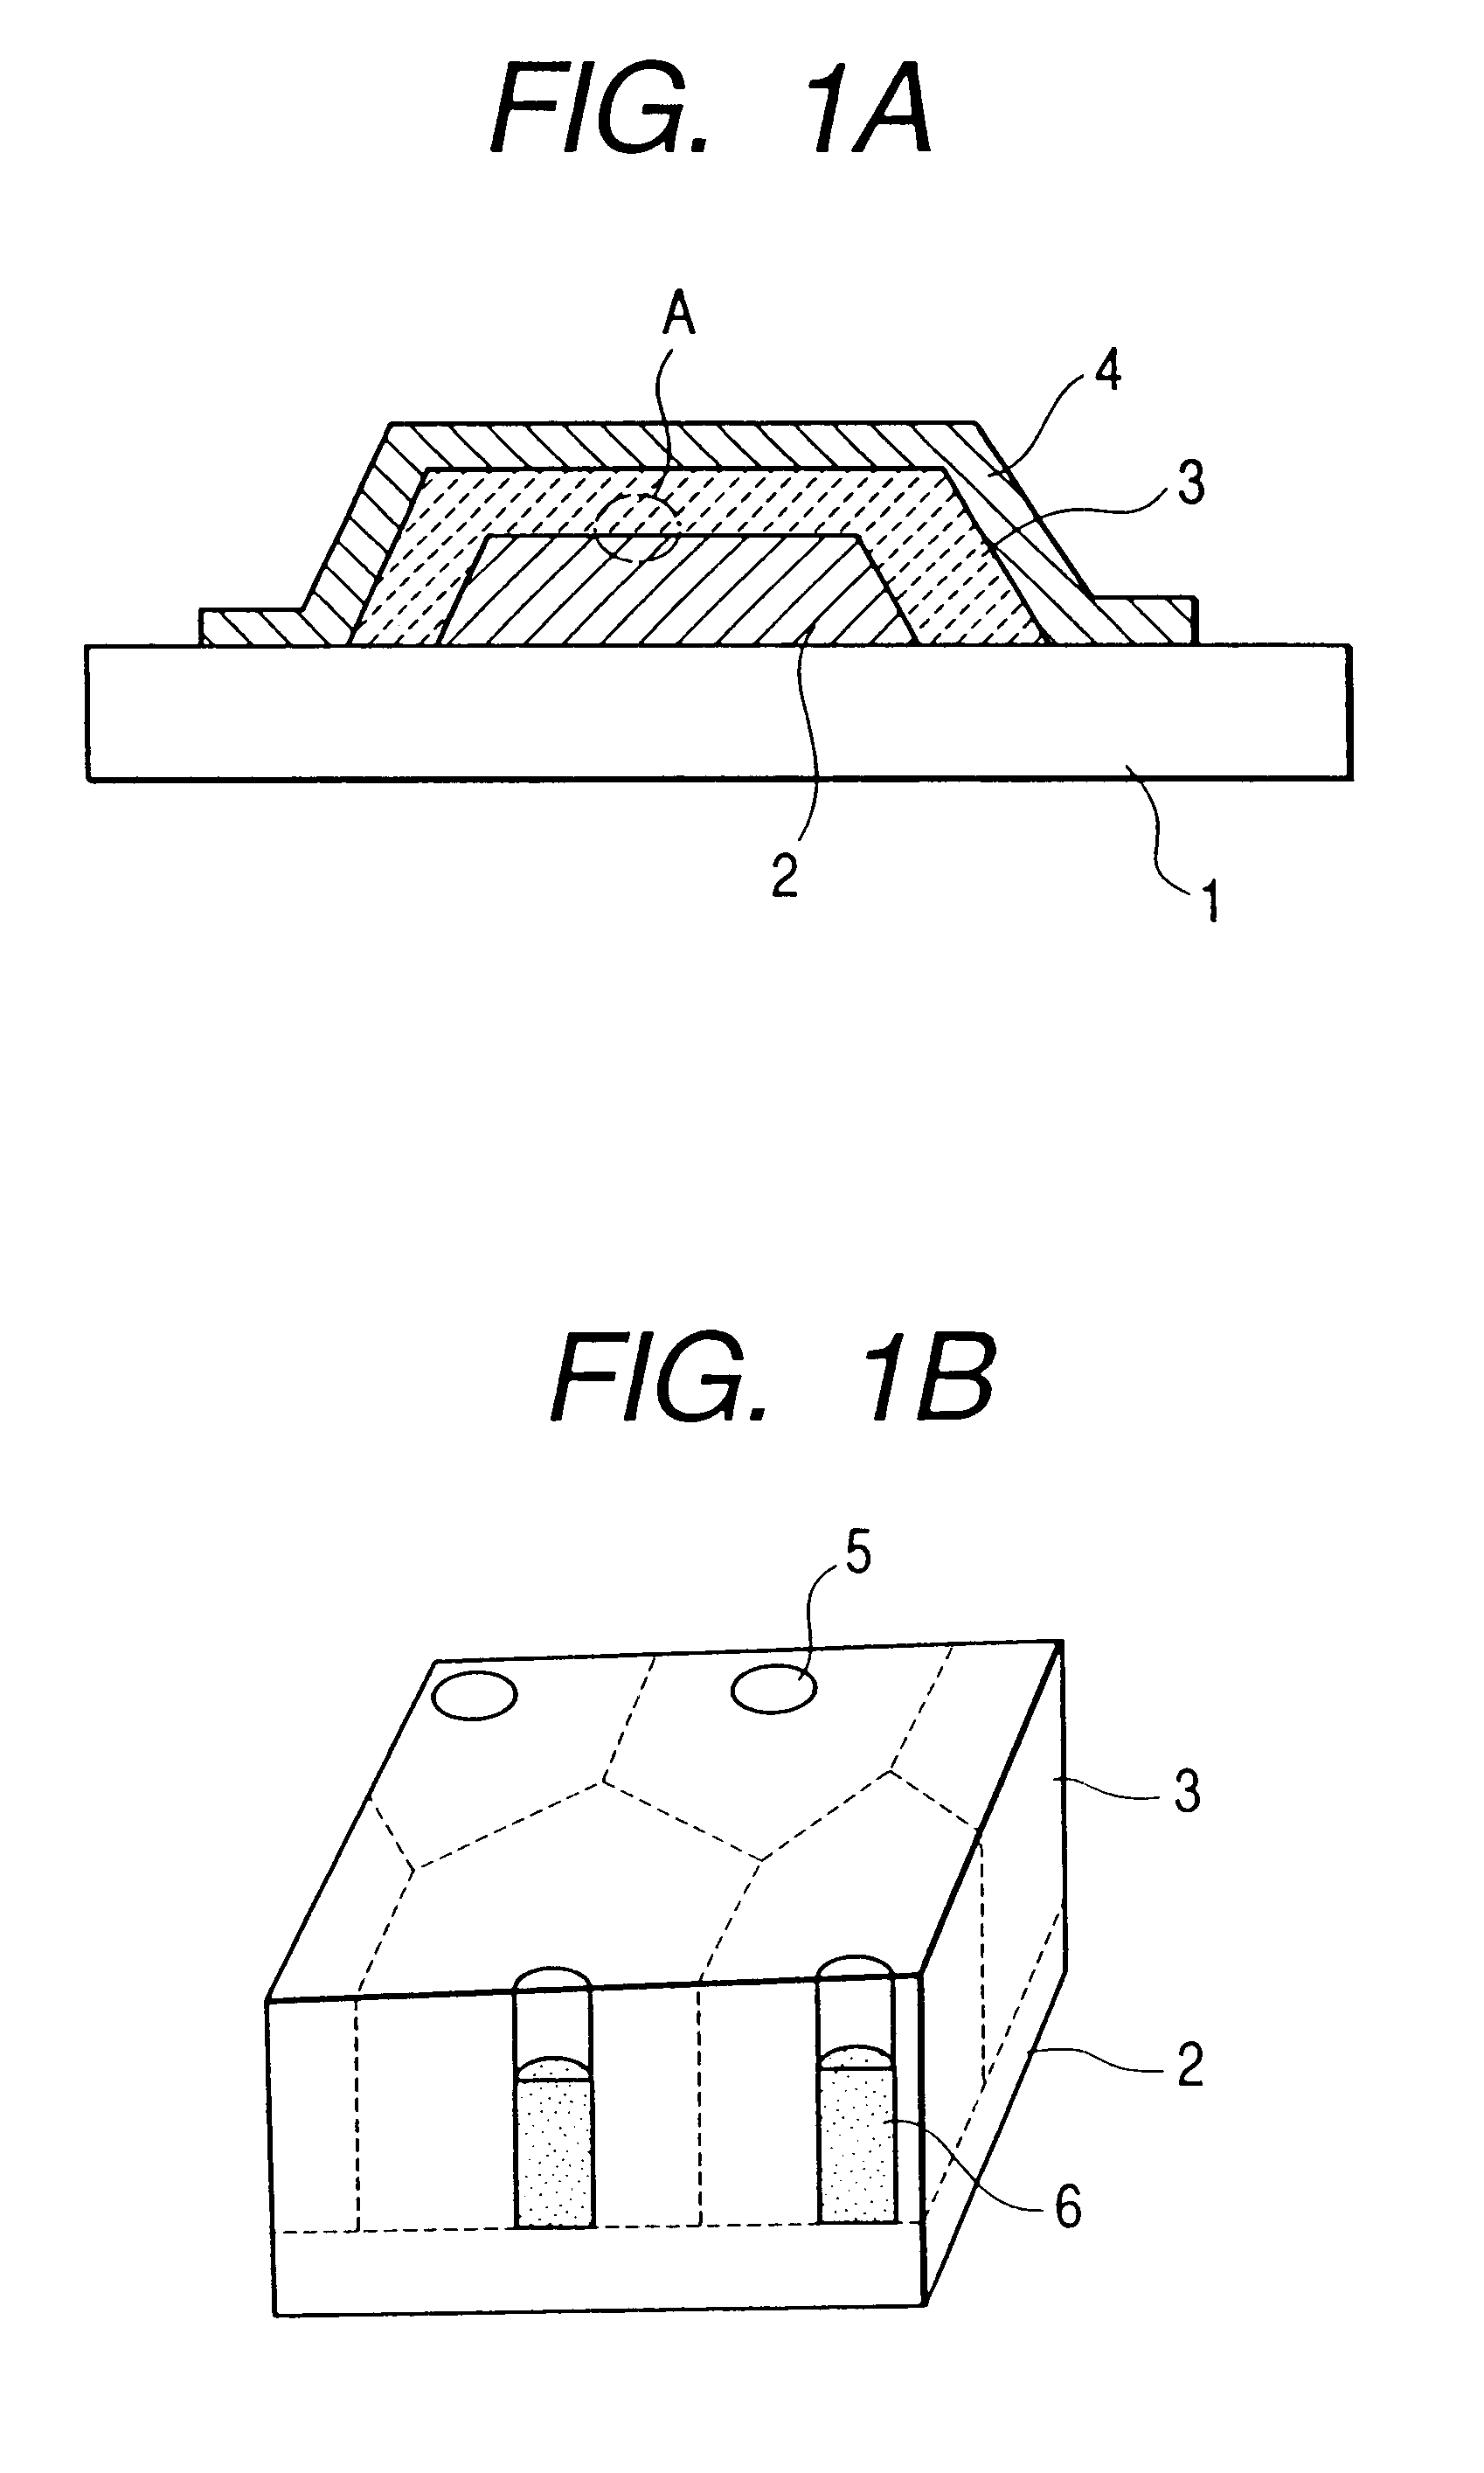 Electron-emitting device provided with pores that have carbon deposited therein